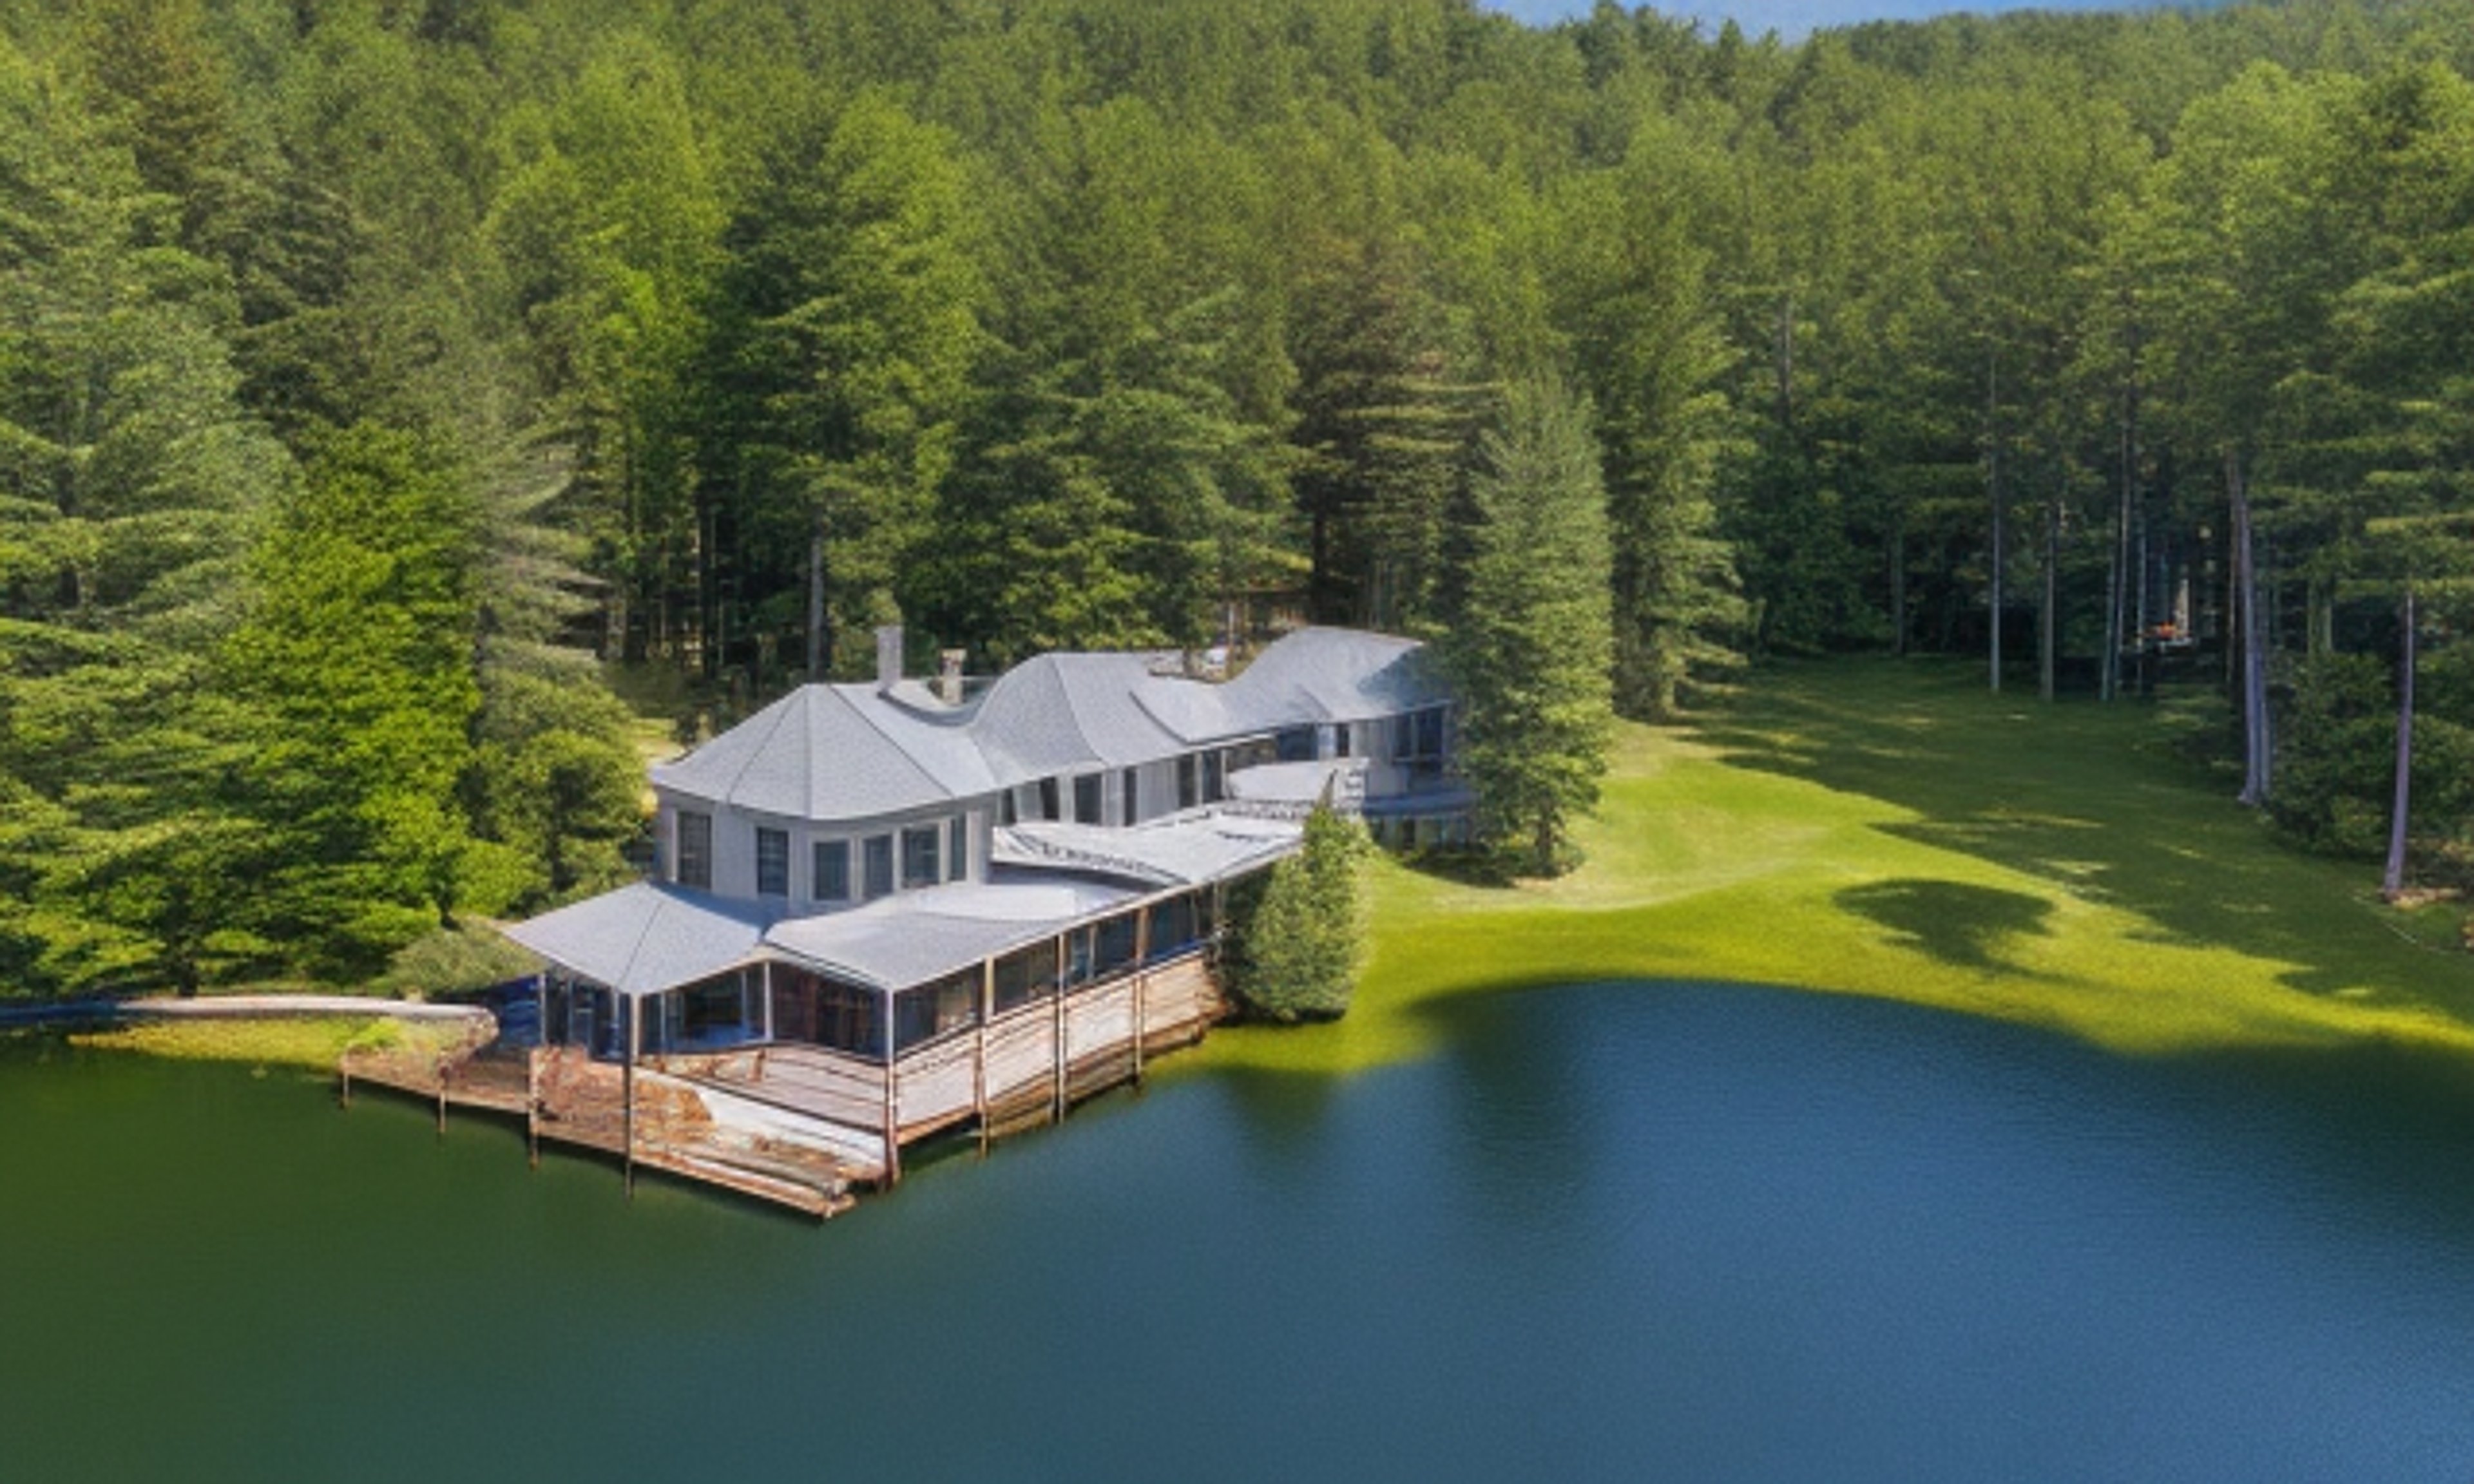 Lake George Home with Panoramic Views Sells for $4 Million: A Look Inside the Most Expensive House on the Market in Washington County